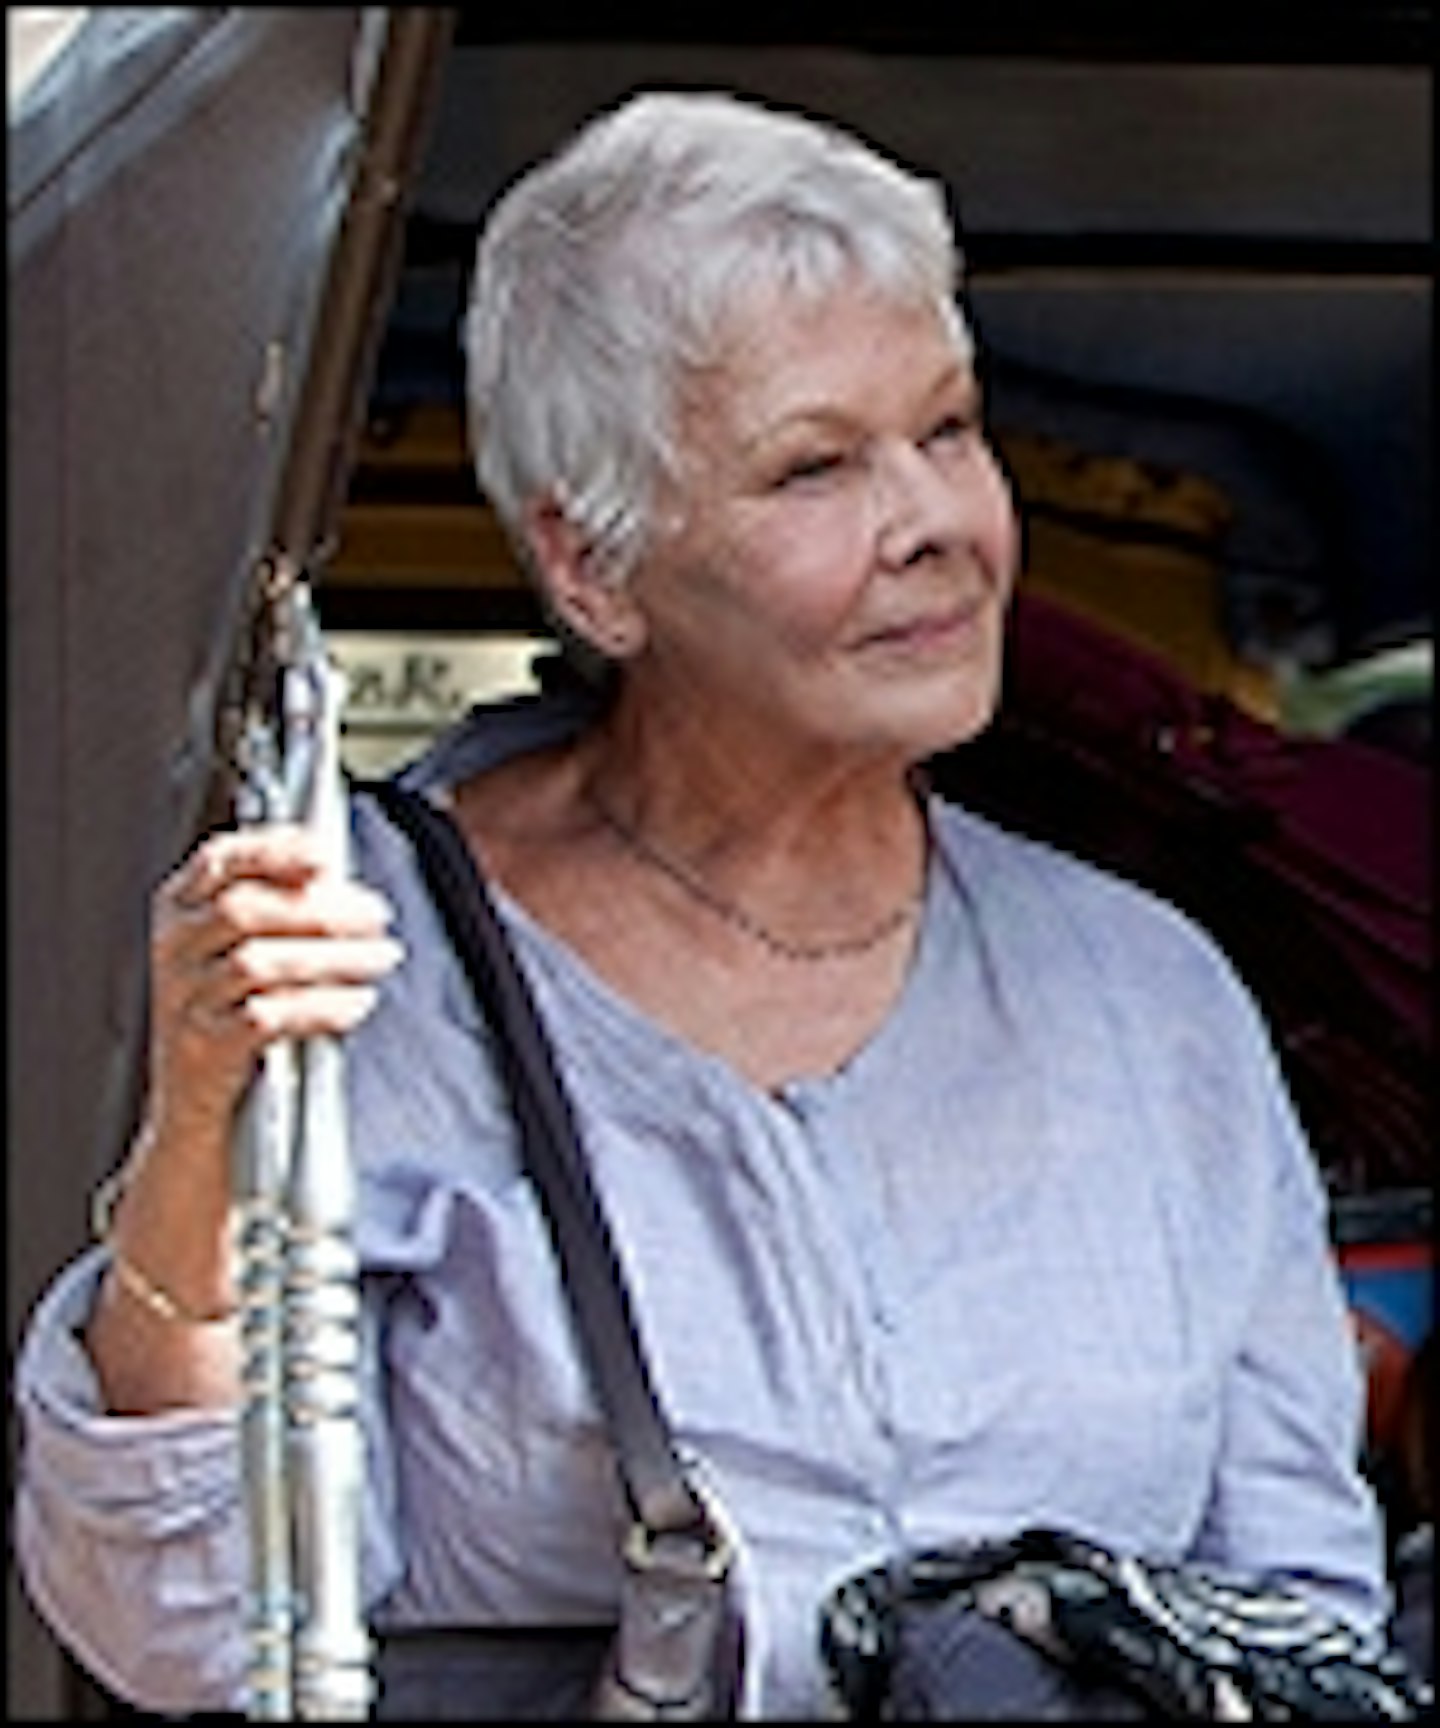 New Best Exotic Marigold Hotel Clip